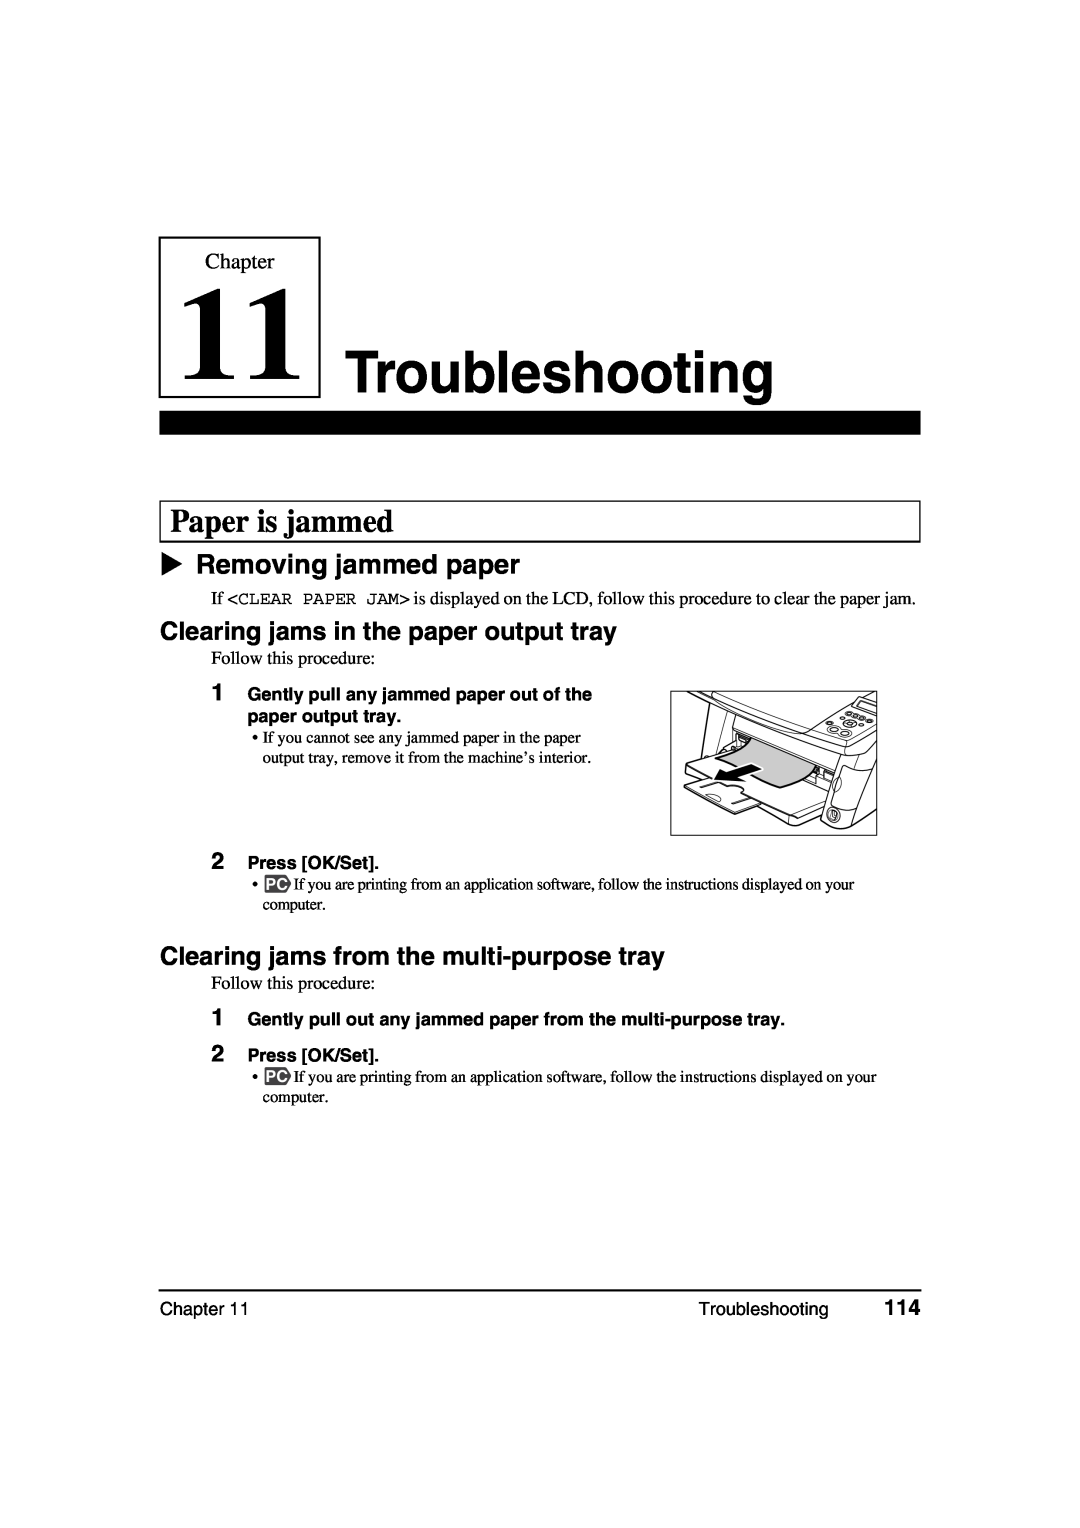 Canon MP360 manual Troubleshooting, Paper is jammed, Removing jammed paper, Clearing jams in the paper output tray, Chapter 